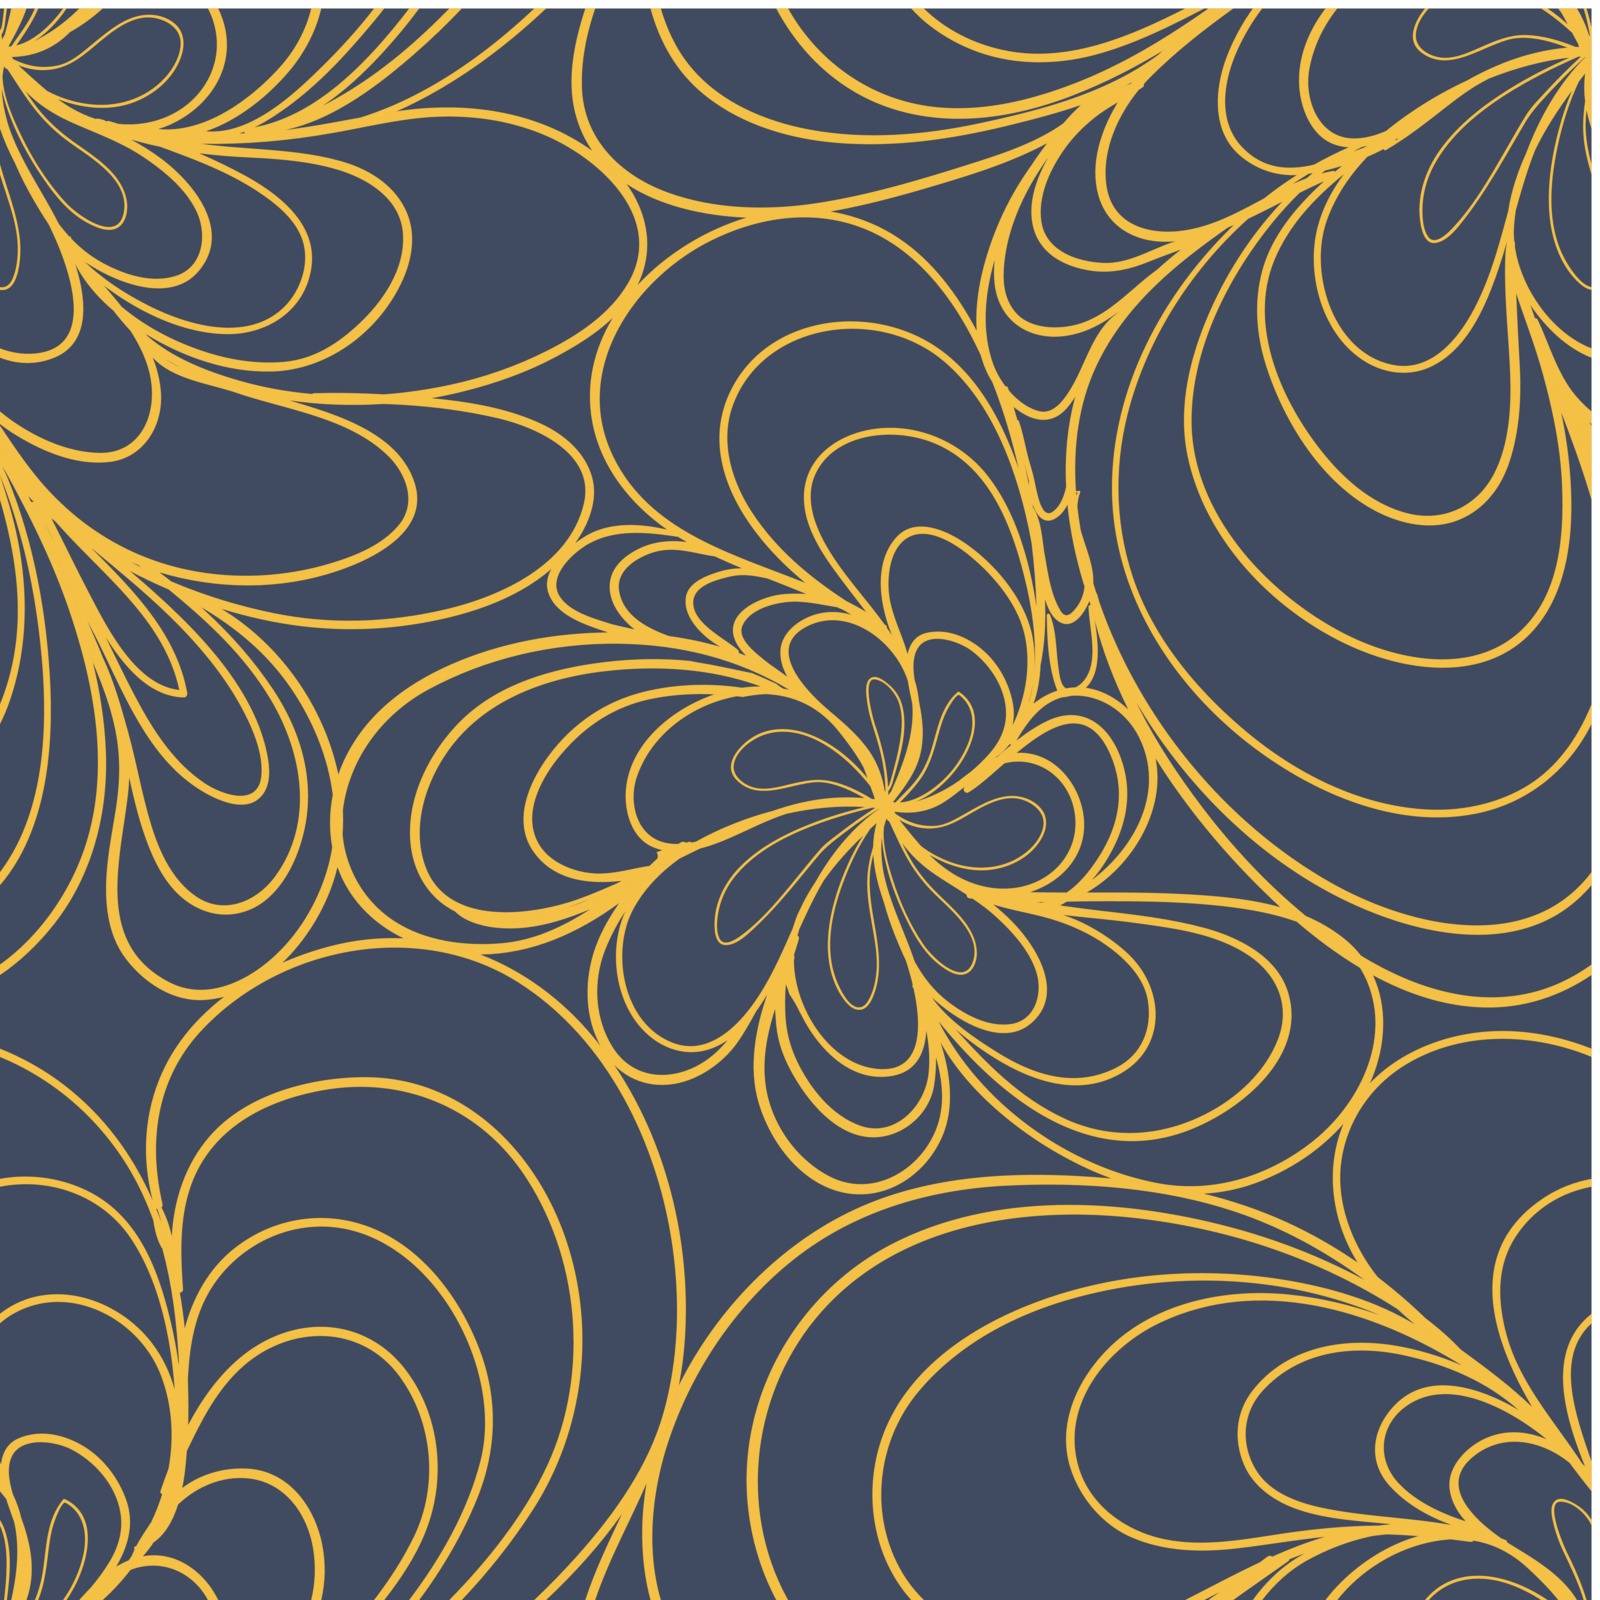 Abstract seamless pattern with simple elements by lolya1988